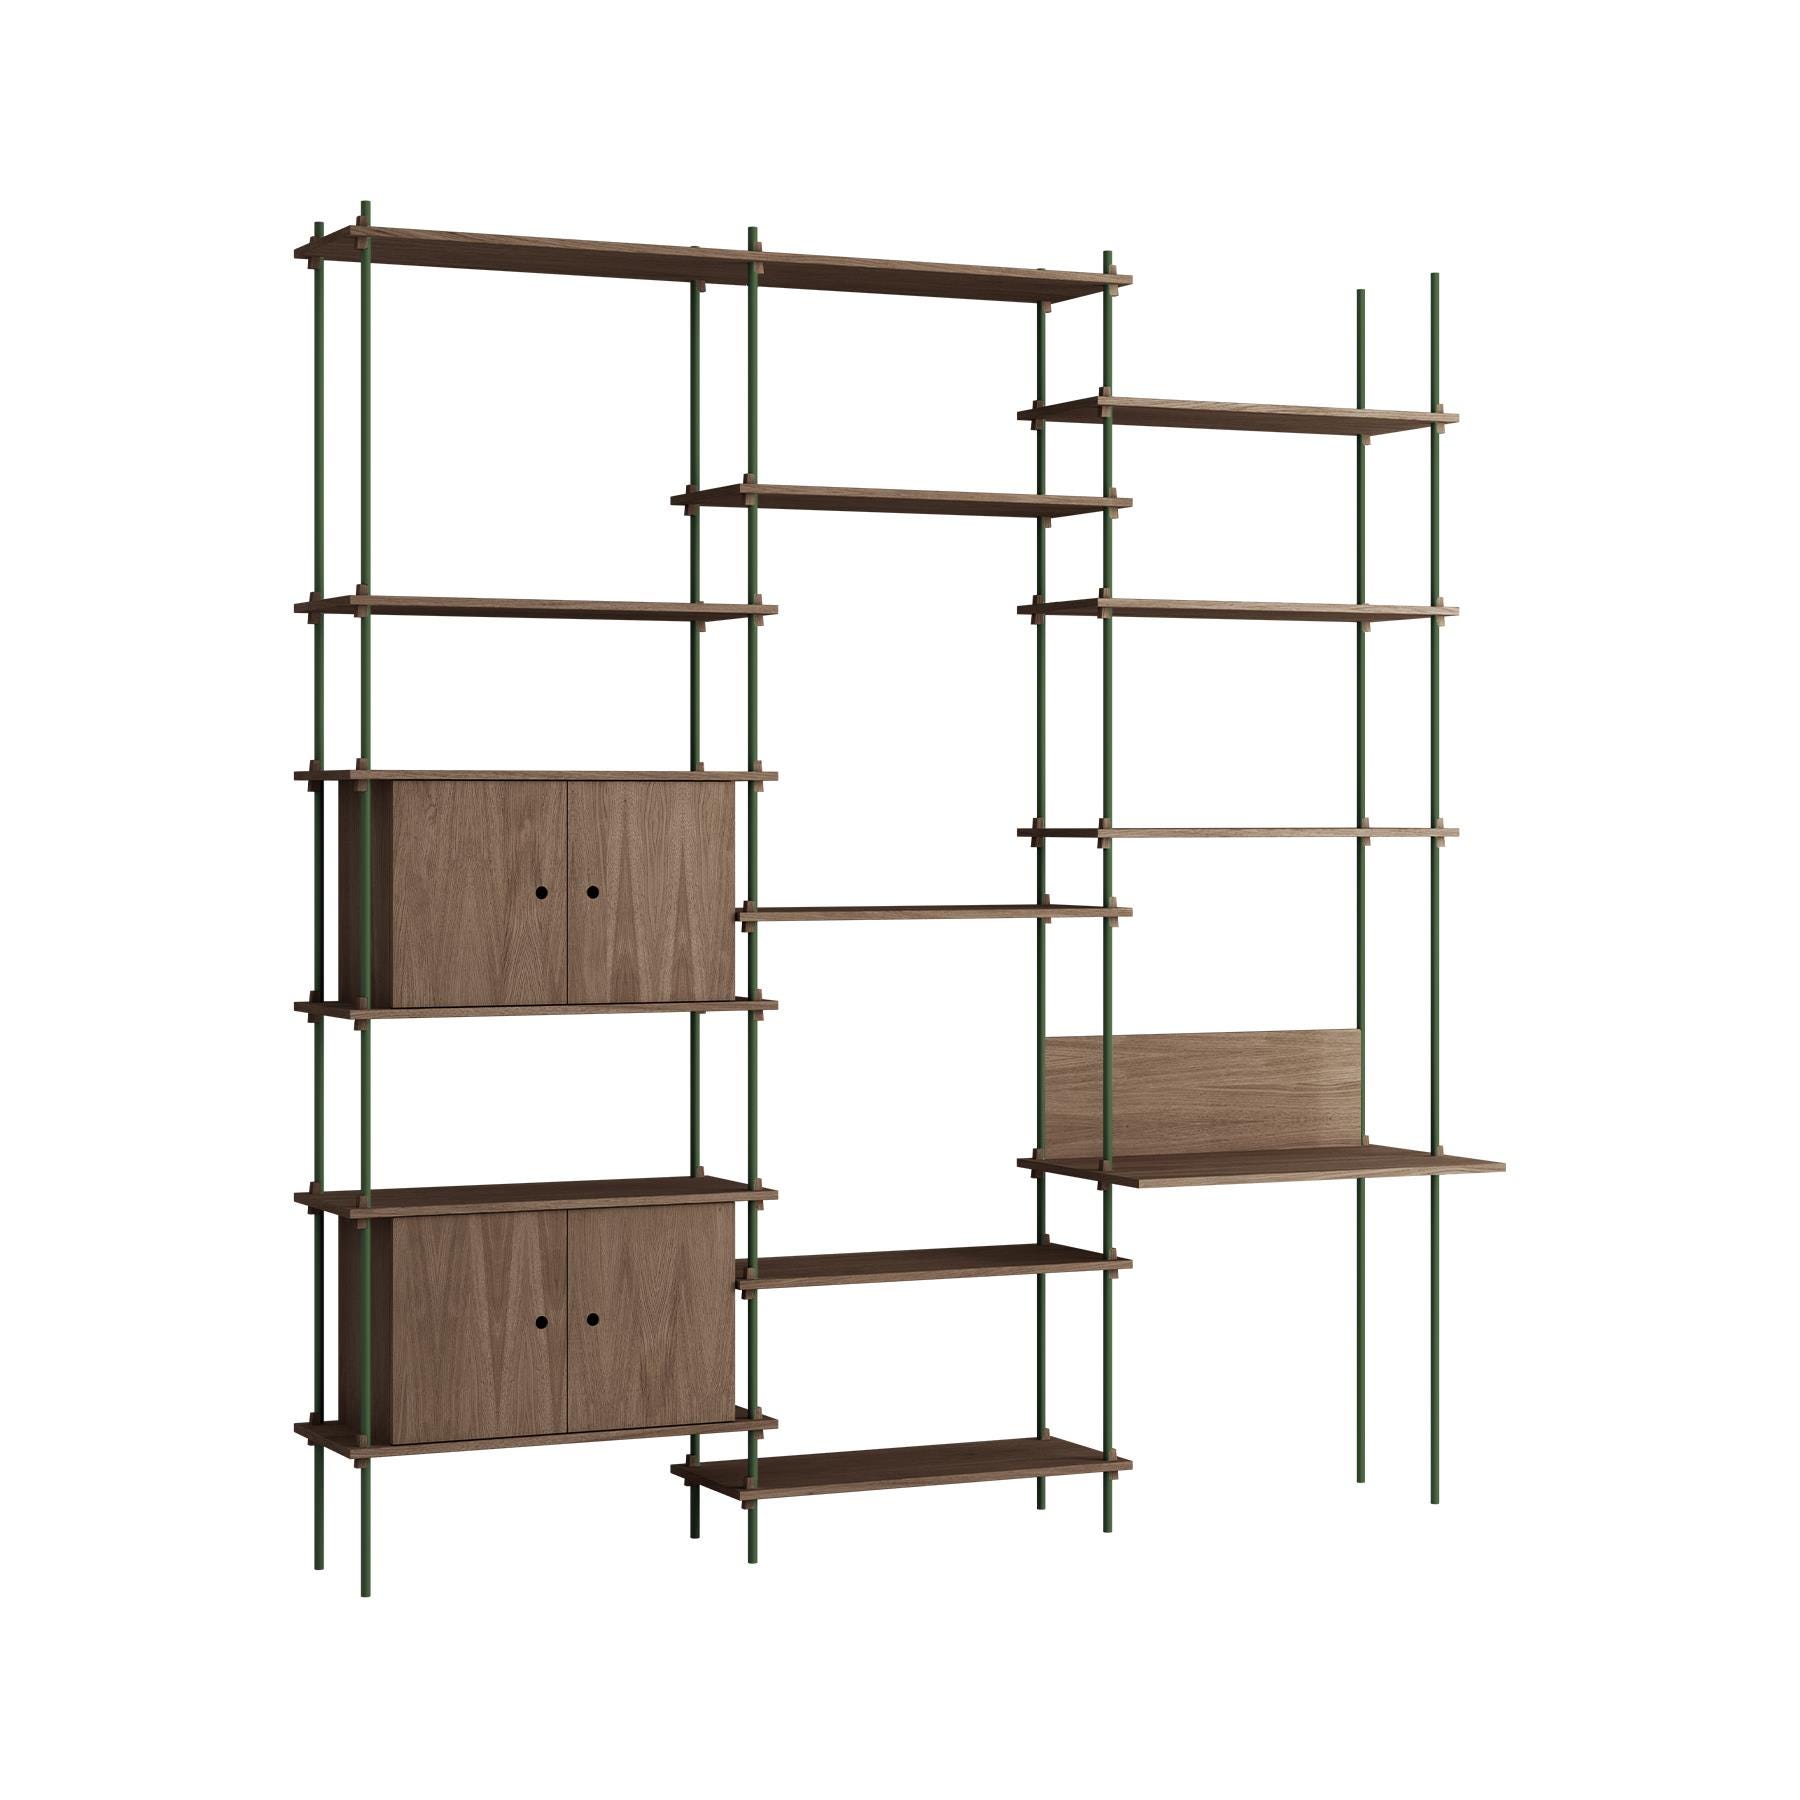 Moebe Triple Shelving System 2 Cabinets And Desk Smoked Oak Pine Green Dark Wood Designer Furniture From Holloways Of Ludlow